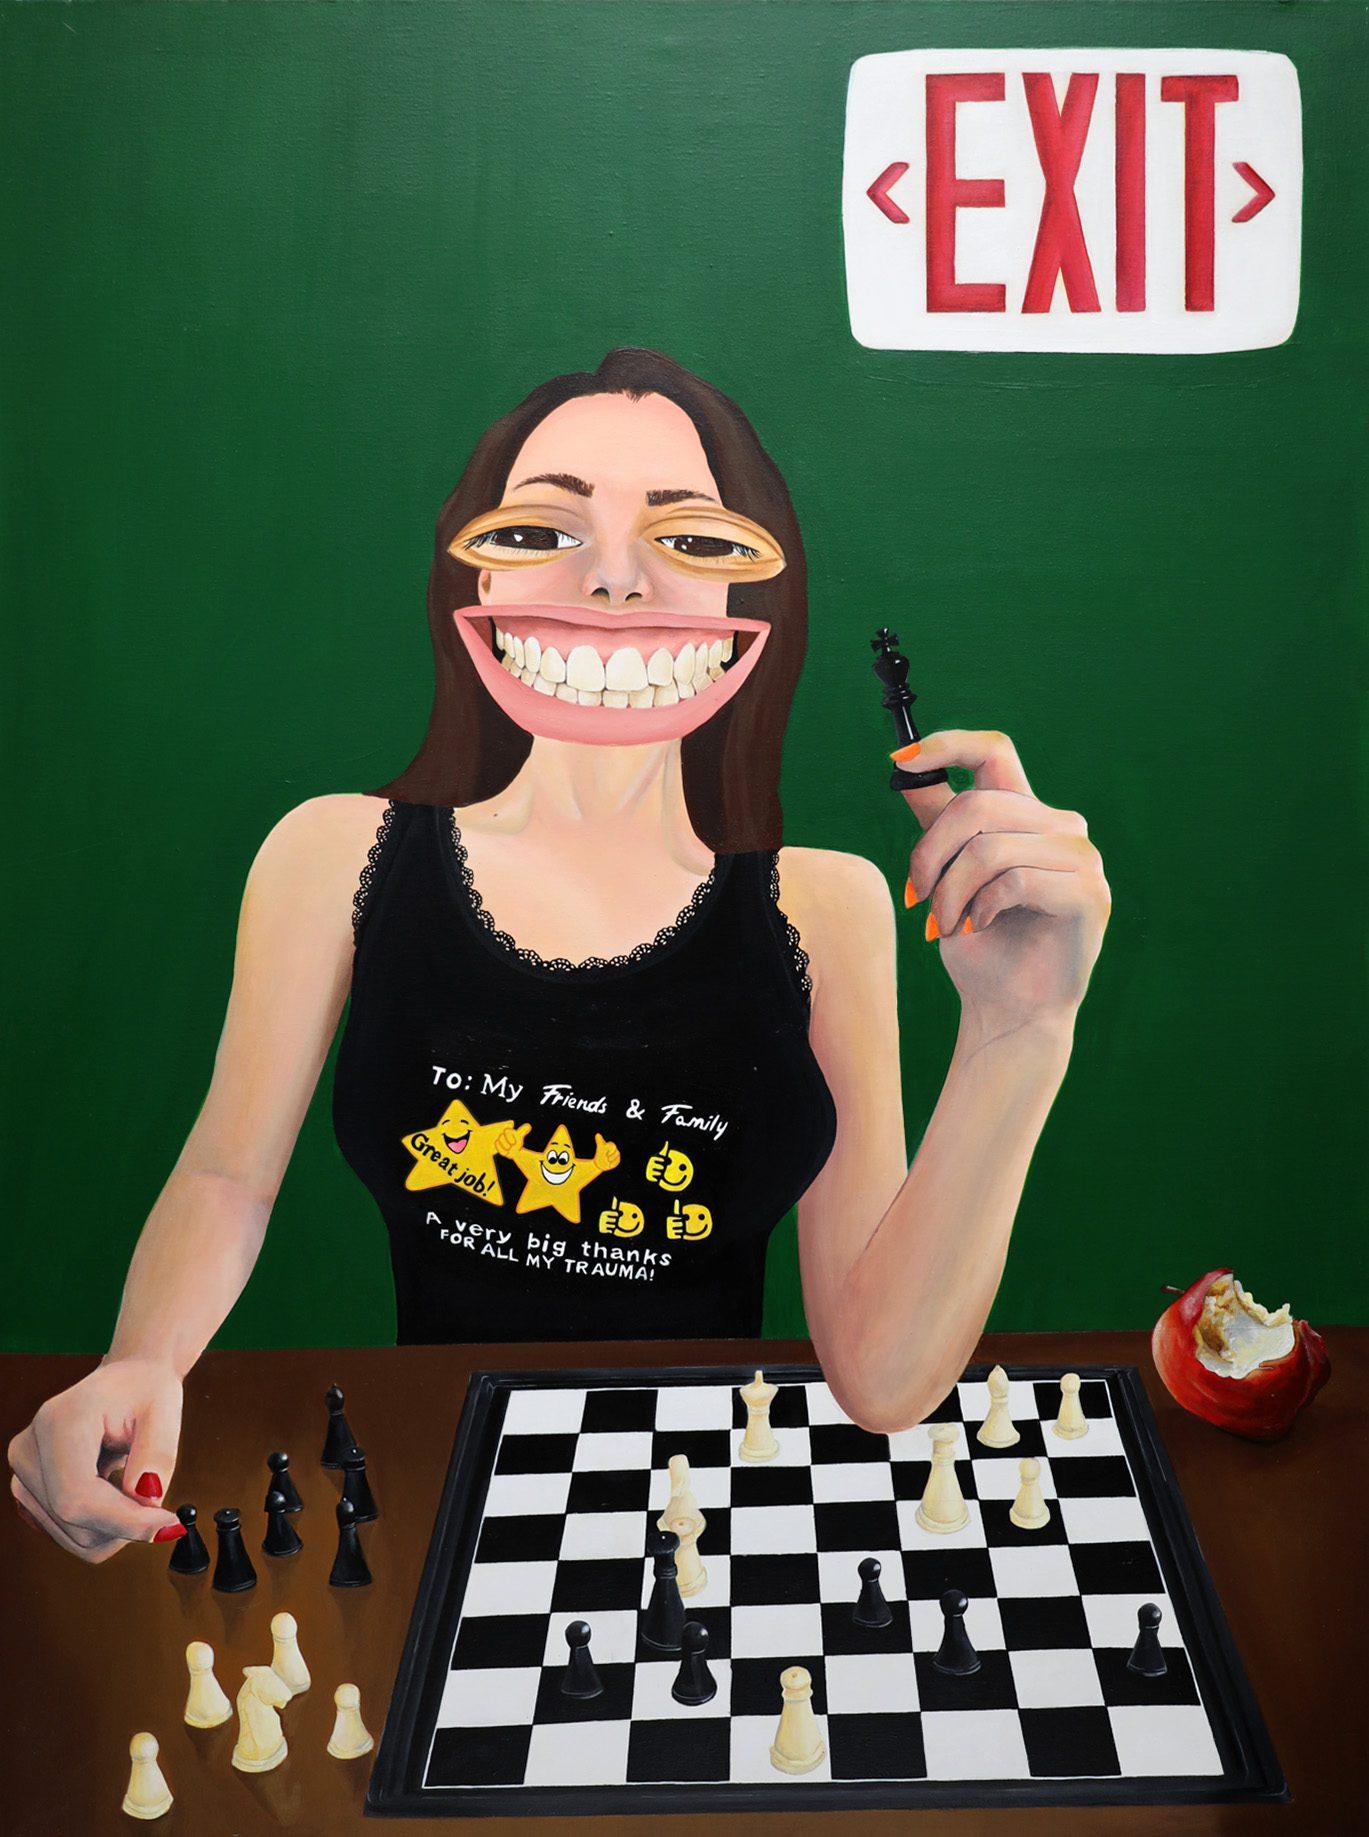 Eva Carzul Figurative Painting - The Game of Life, Jacque 